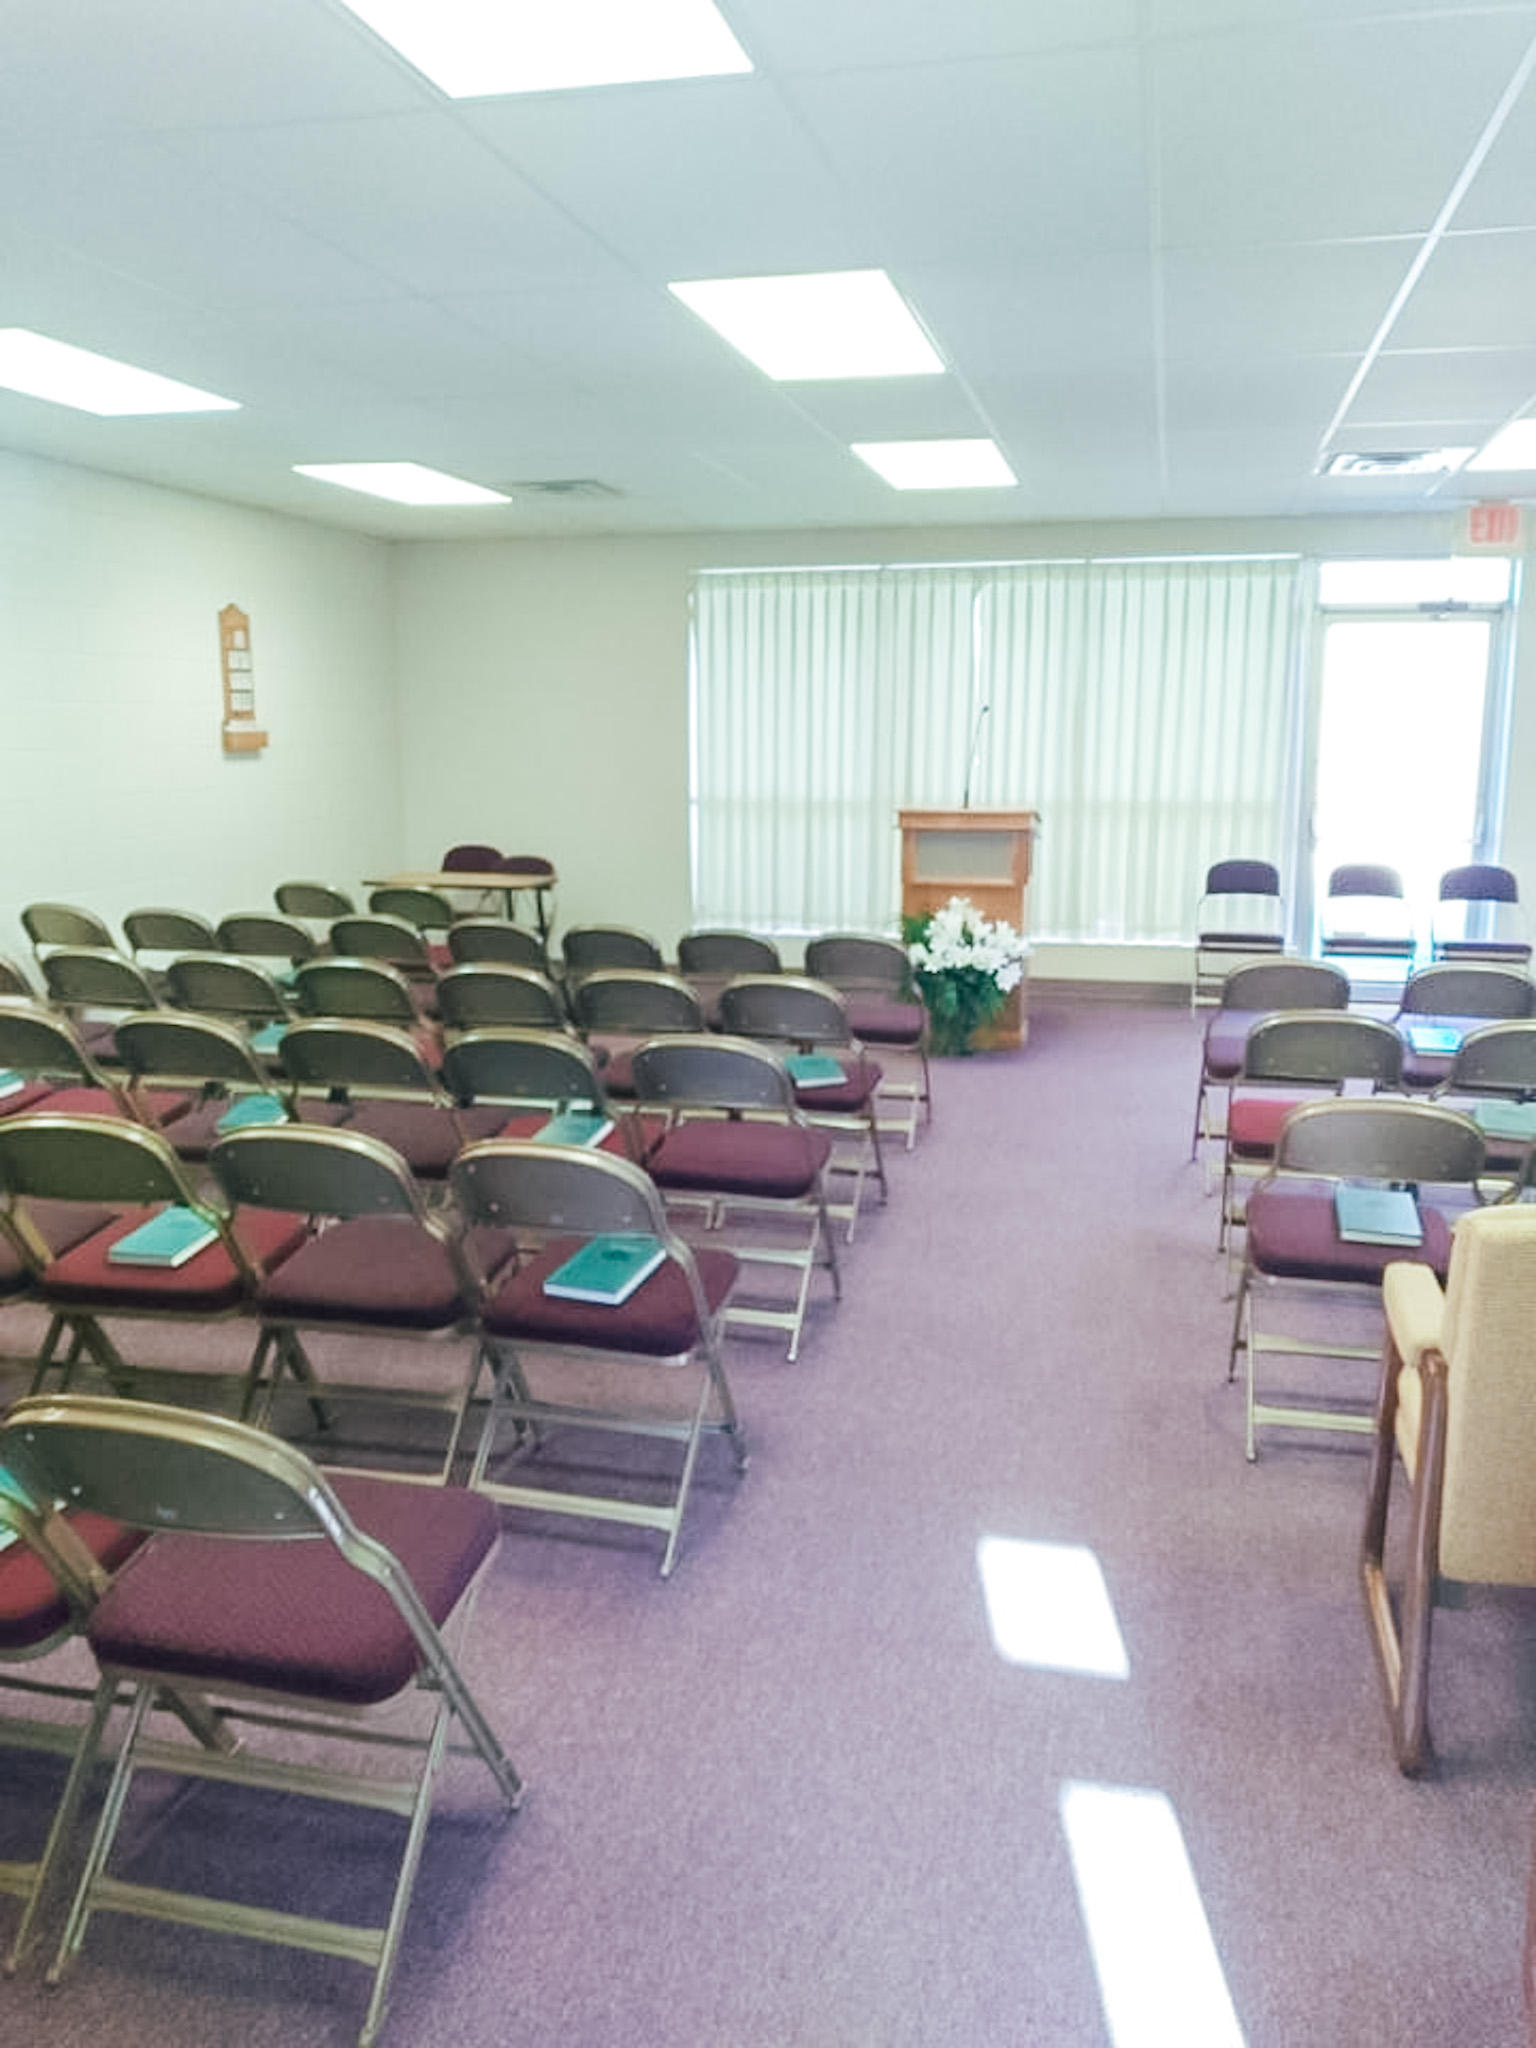 A look inside the Holdrege building of The Church of Jesus Christ of Latter-Day Saints